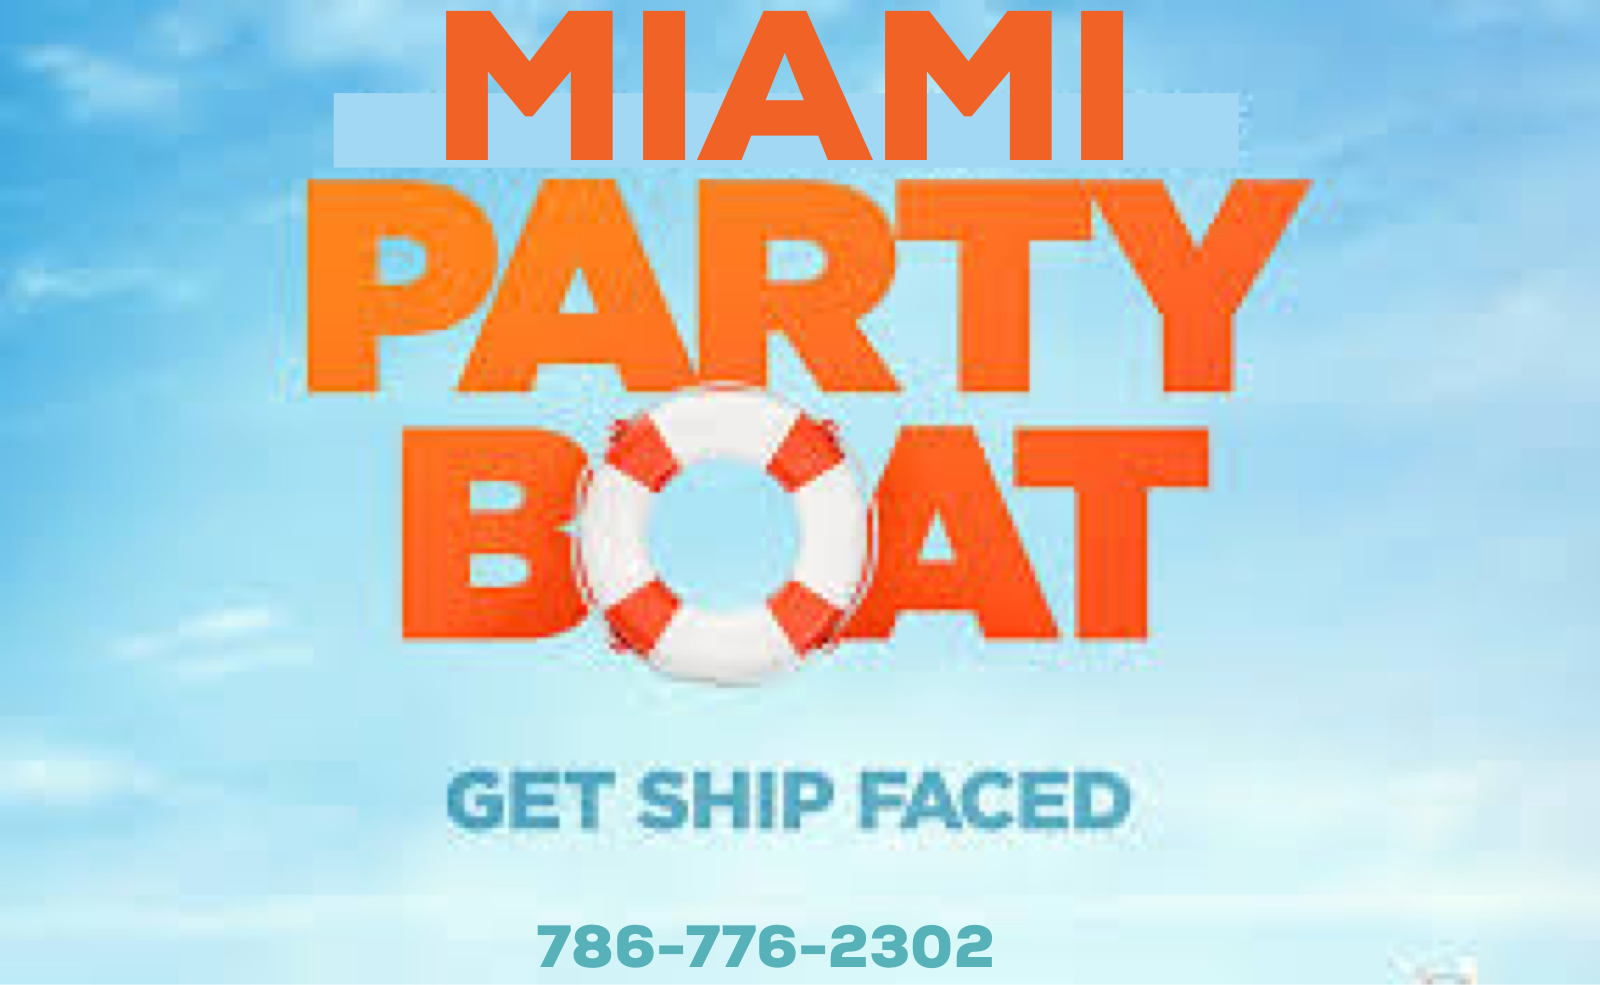 MIAMI BOAT PARTY - FREE DRINKS - SOUTH BEACH BOAT PARTY